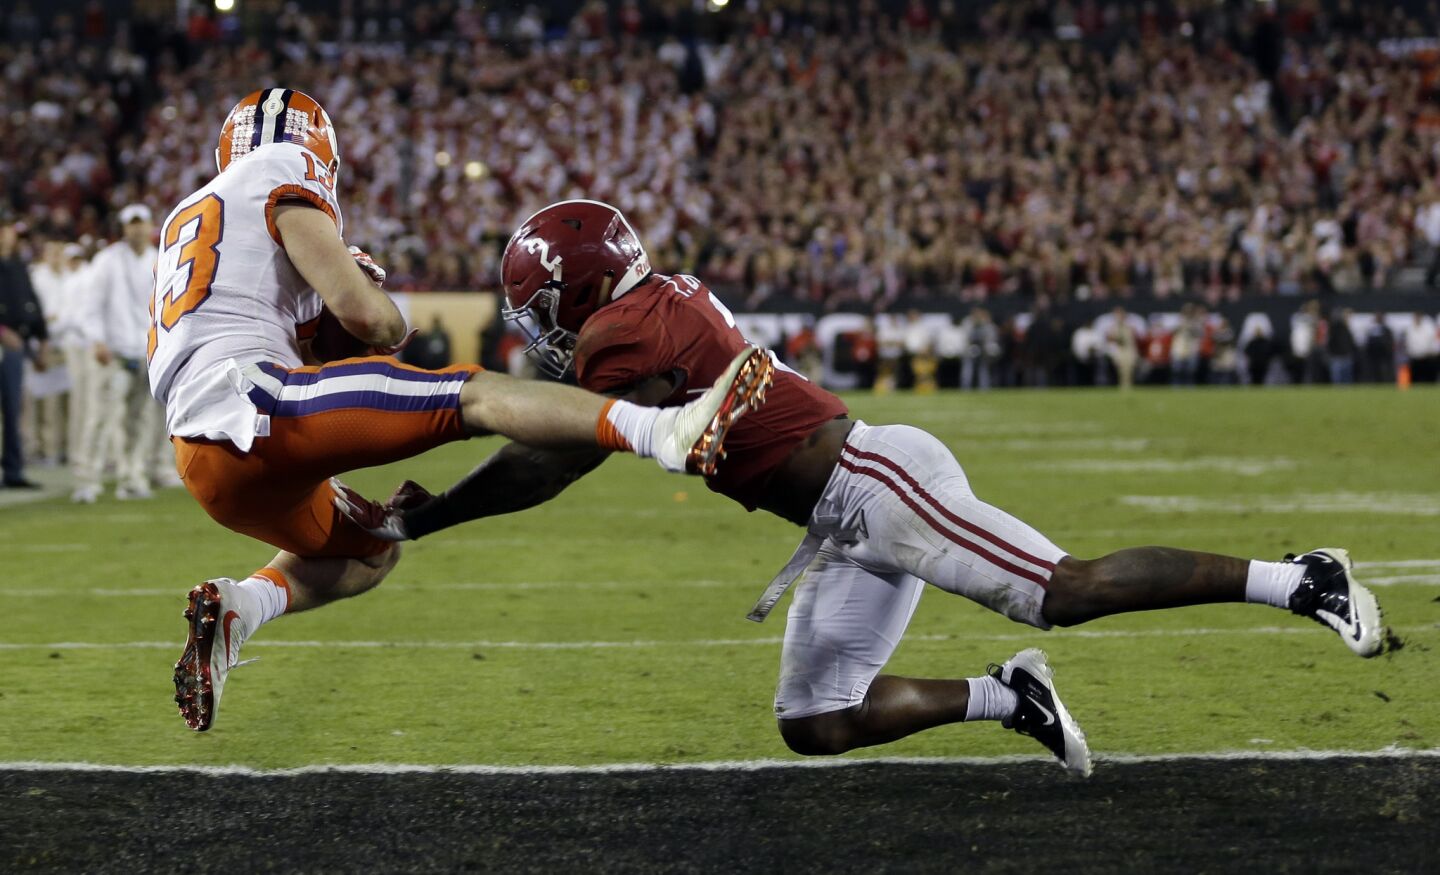 Clemson receiver Hunter Renfrow catches a two-yard touchdown pass against Alabama's Tony Brown during the final seconds of the fourth quarter to give the Tigers a 35-31 lead.